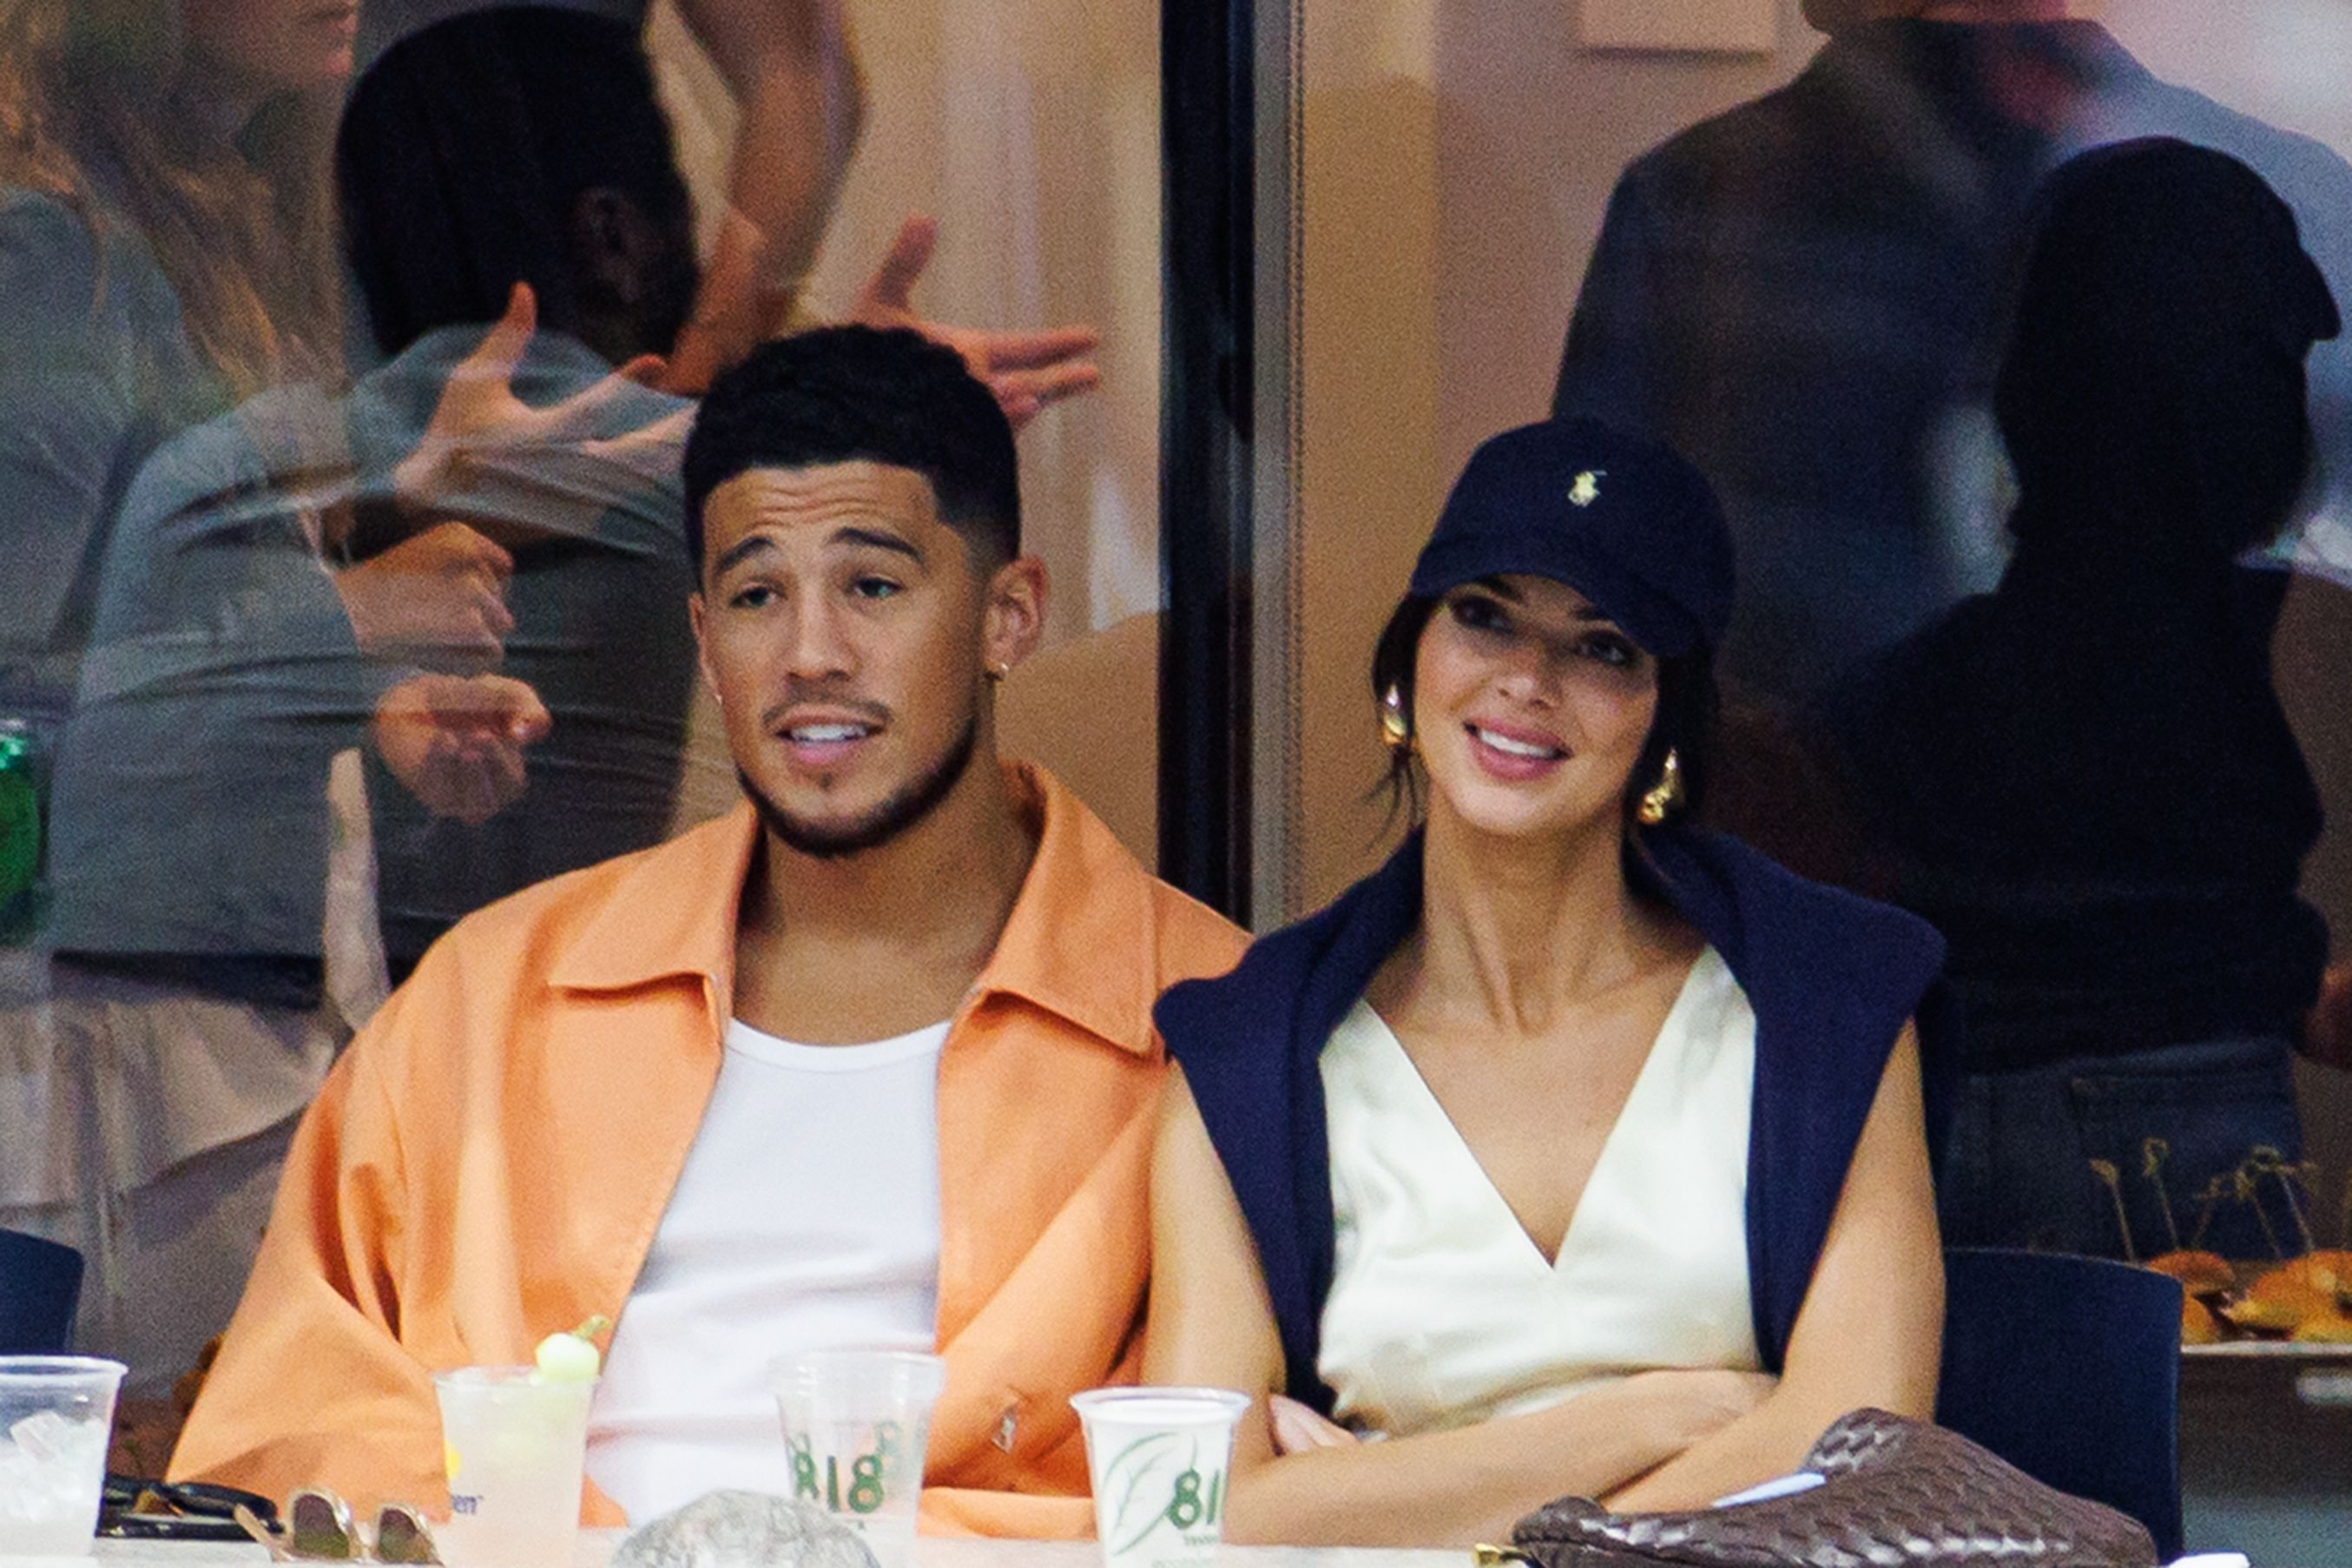 Kendall Jenner & boyfriend Devin Booker are joined by her younger